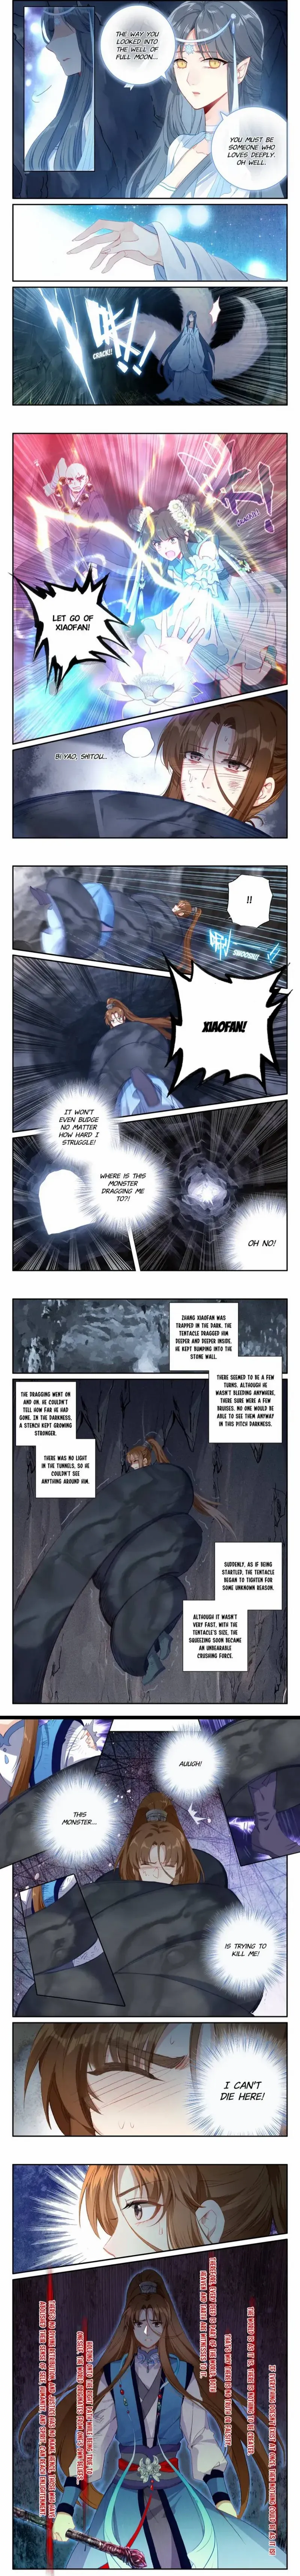 Celestial Destroyer - Page 2